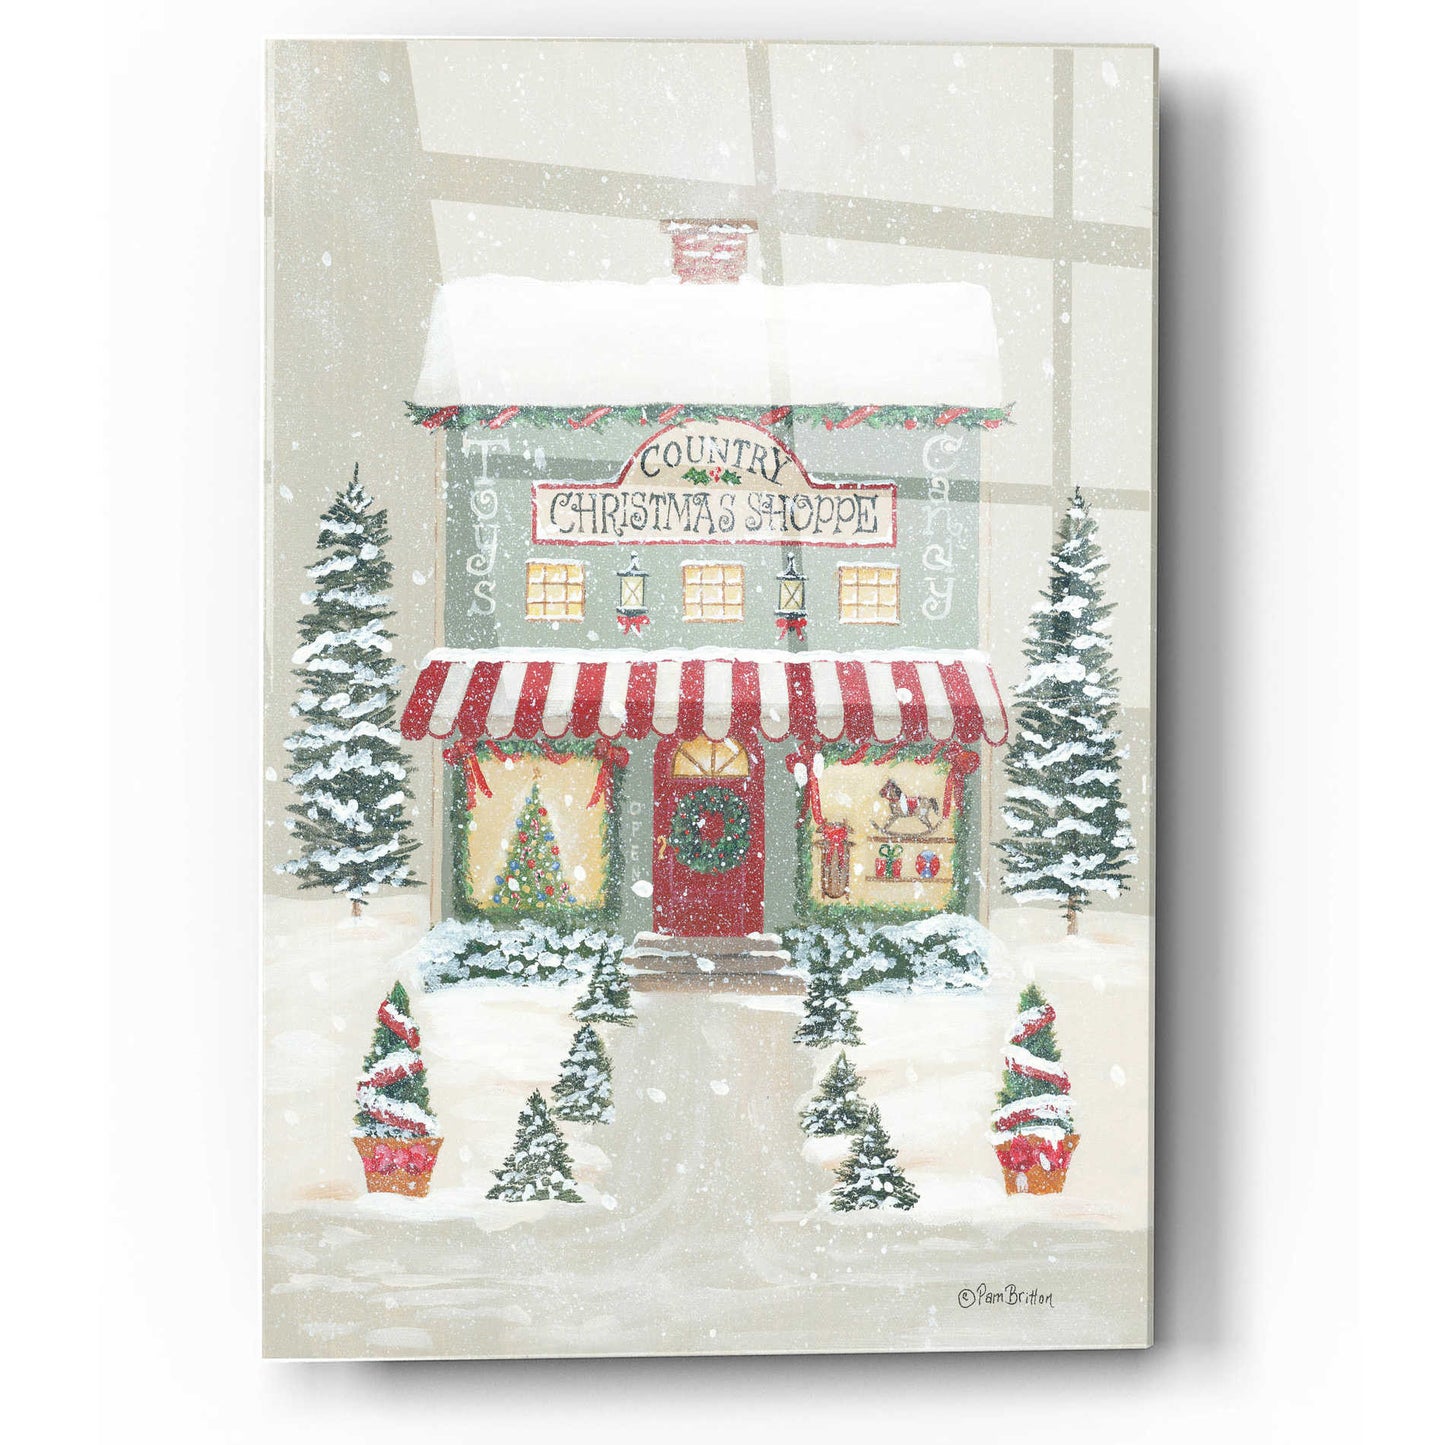 Epic Art 'Country Christmas Shoppe' by Pam Britton, Acrylic Glass Wall Art,12x16